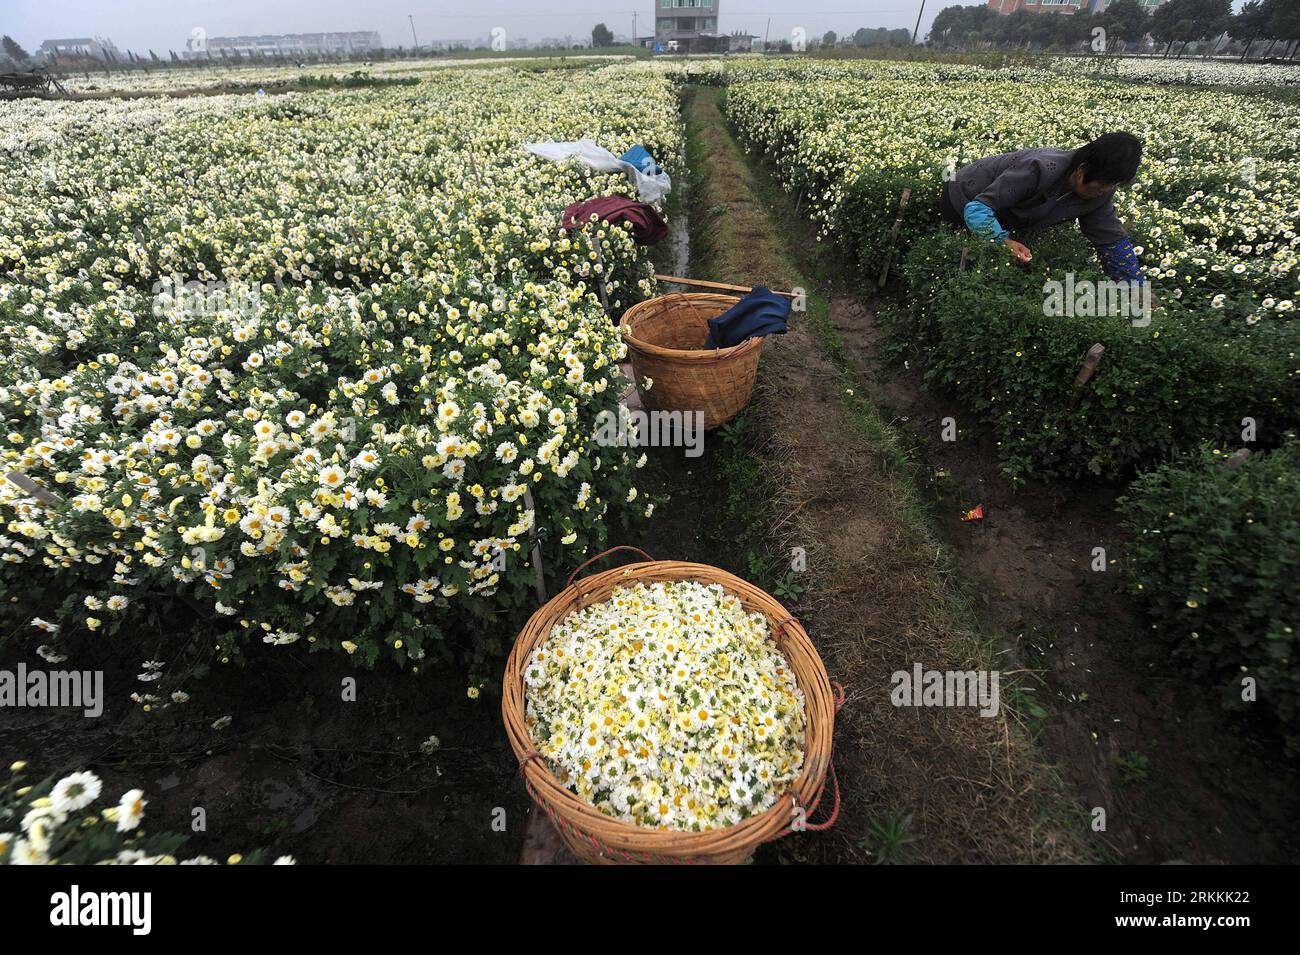 Bildnummer: 56251120  Datum: 05.11.2011  Copyright: imago/Xinhua (111105) -- TONGXIANG, Nov. 5, 2011 (Xinhua) -- Farmers harvest chrysanthemums morifolium in Tongxiang, east China s Zhejiang Province, Nov. 5, 2011. Tongxiang, with some 300-year history of planting chrysanthemums morifolium, is a famous sourceland of the traditional Chinese chrysanthemum tea. (Xinhua/Xu Yu) (zgp) CHINA-TONGXIANG-CHRYSANTHEMUMS MORIFOLIUM-HARVEST (CN) PUBLICATIONxNOTxINxCHN Wirtschaft Landwirtschaft Ernte Teeernte Tee Chrysanthemen Chrysanthementee Fotostory xns x0x 2011 quer      56251120 Date 05 11 2011 Copyri Stock Photo